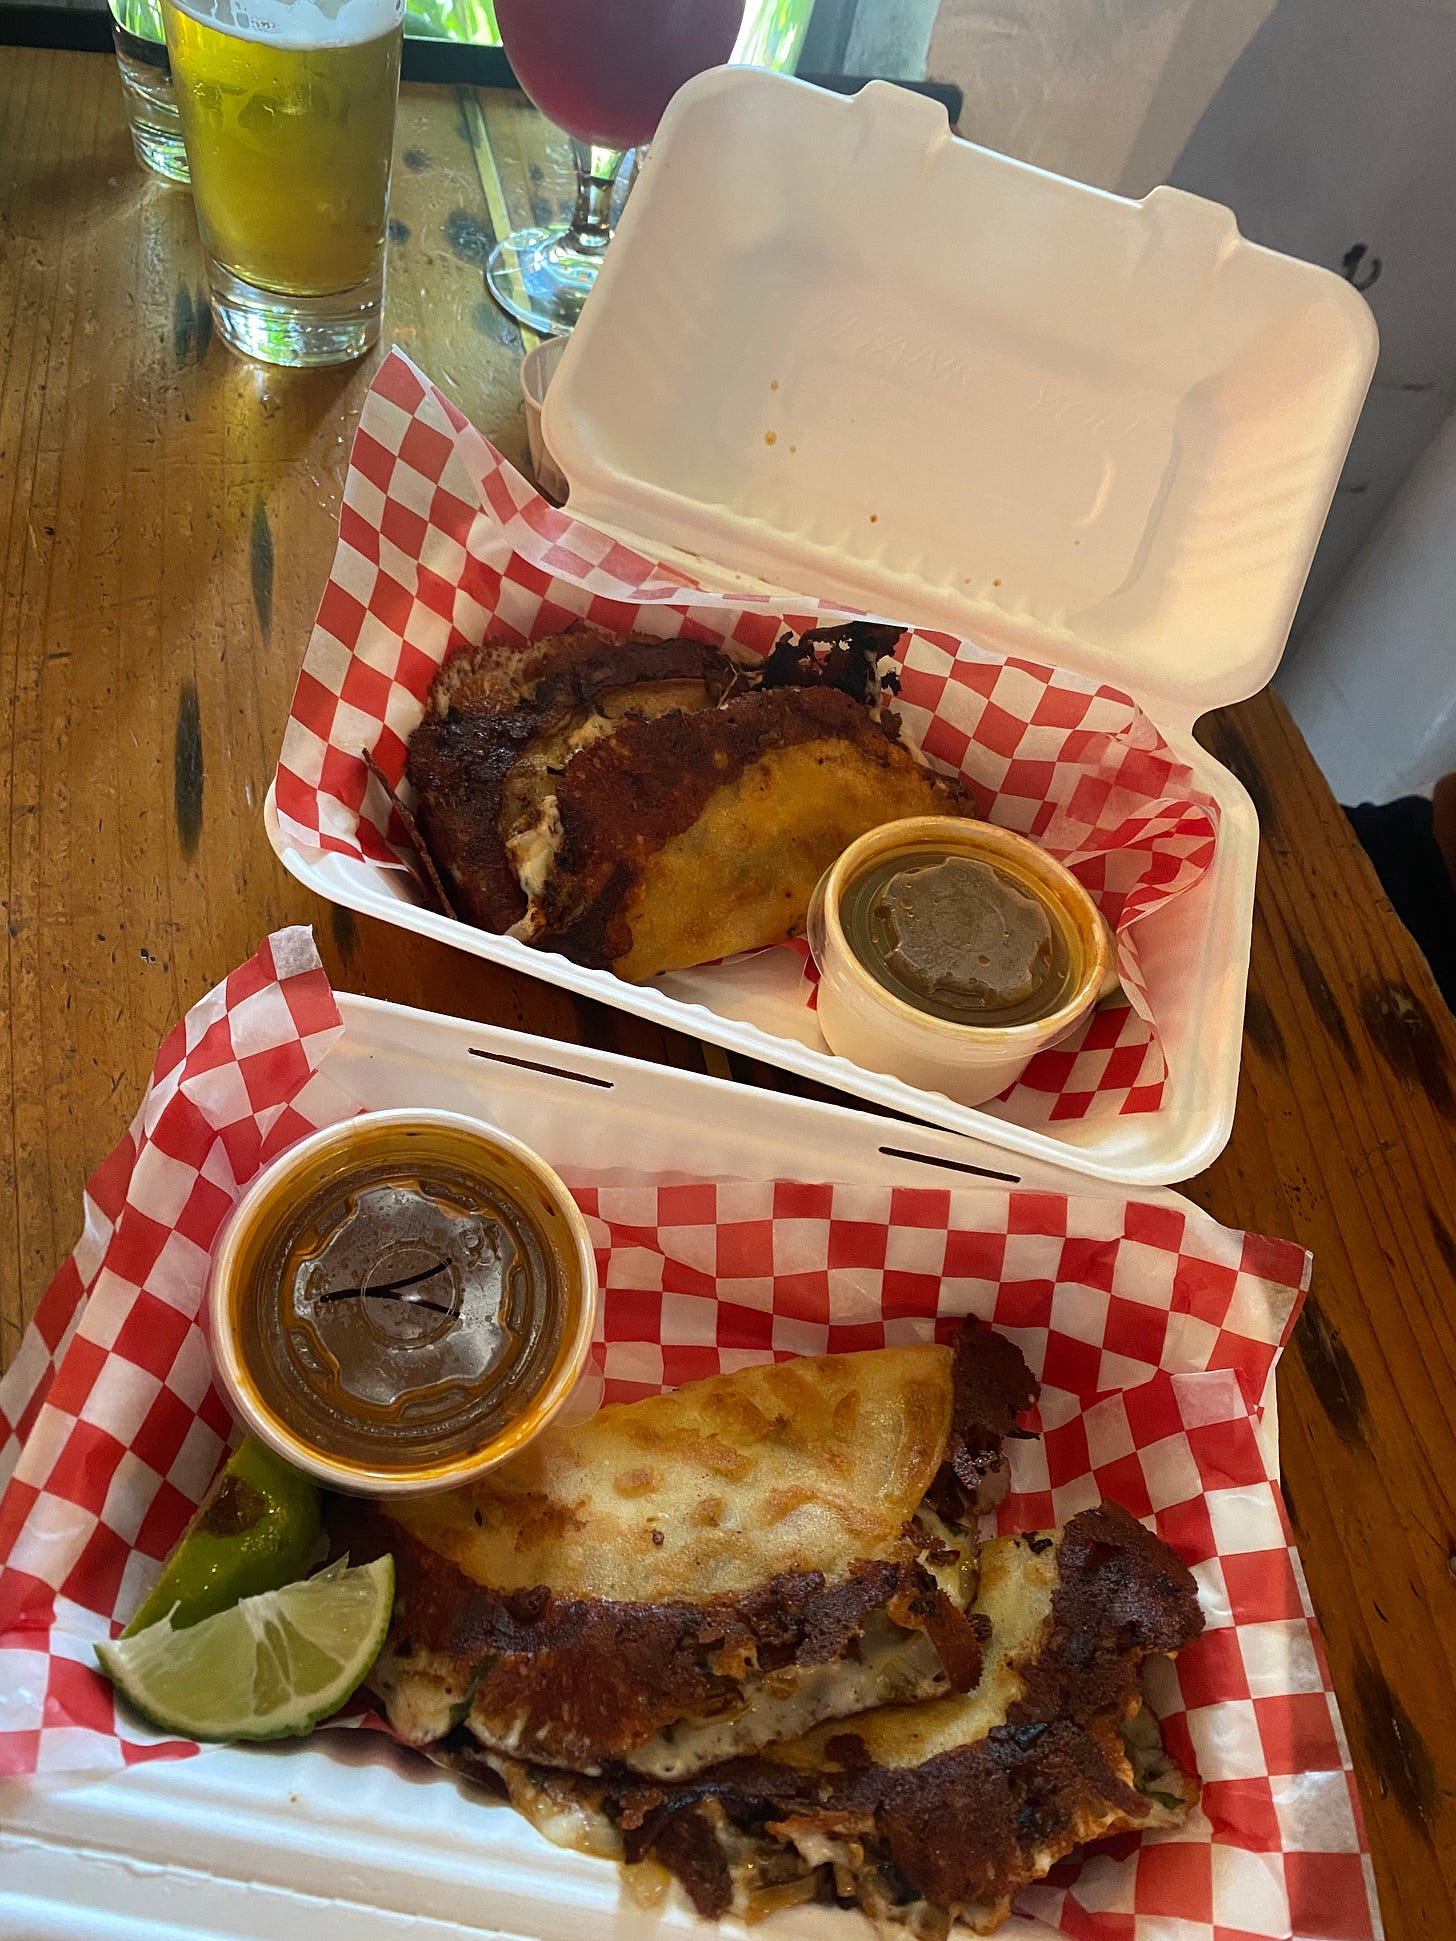 White paper takeout boxes lined with red and white checkered paper, with two birria tacos each, slices of lime and small containers of sauce next to them. In the background are two glasses of beer, one pale and one reddish-purple.